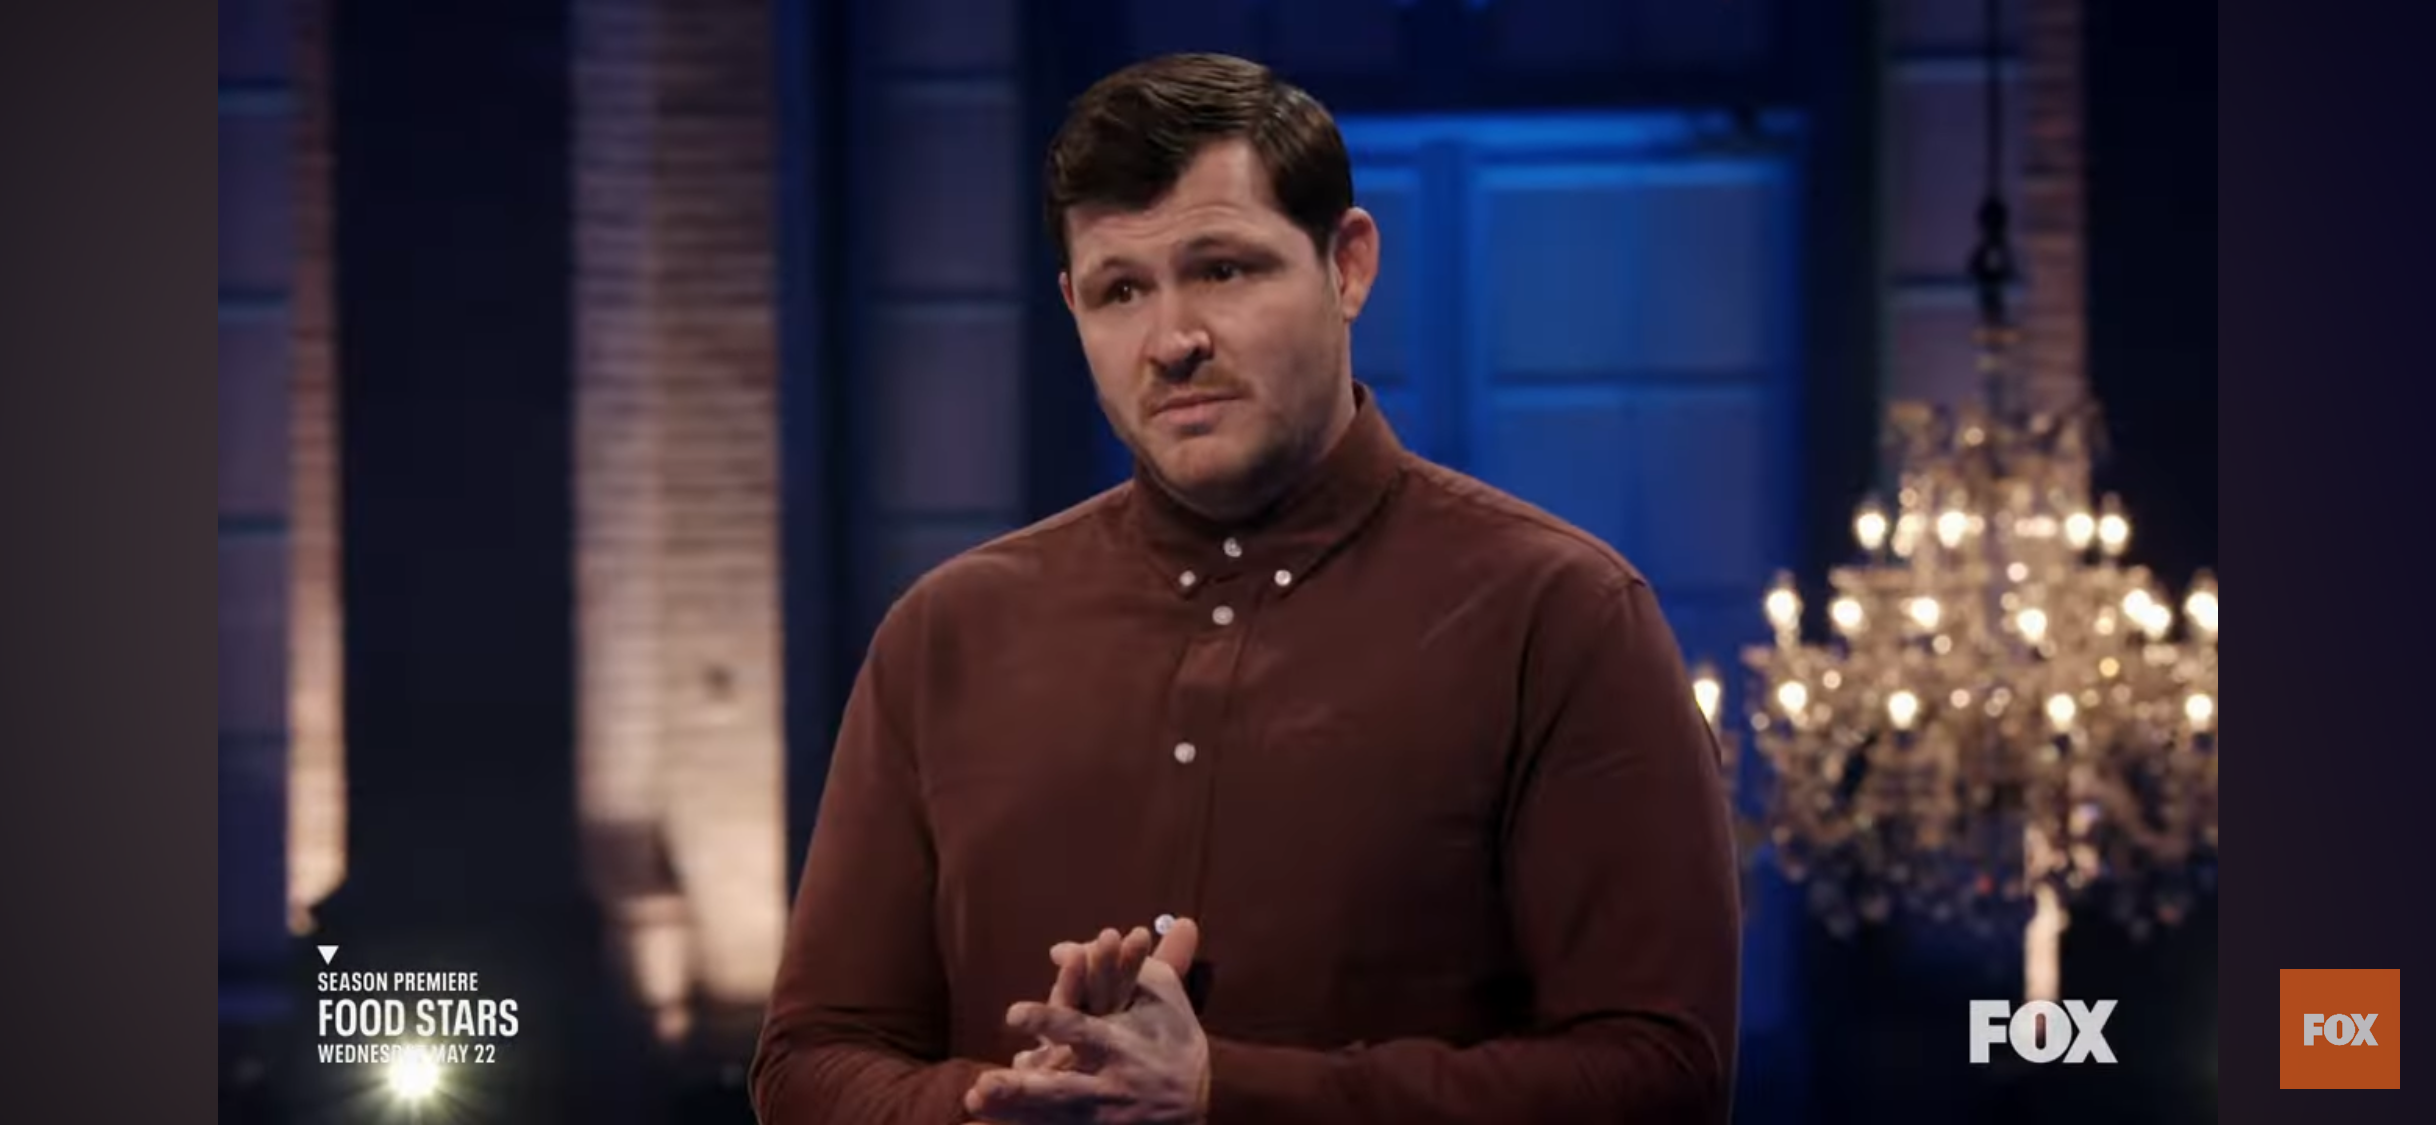 Hot Drops Founder, Andrew, to audition on Gorgon Ramsay's Food Stars